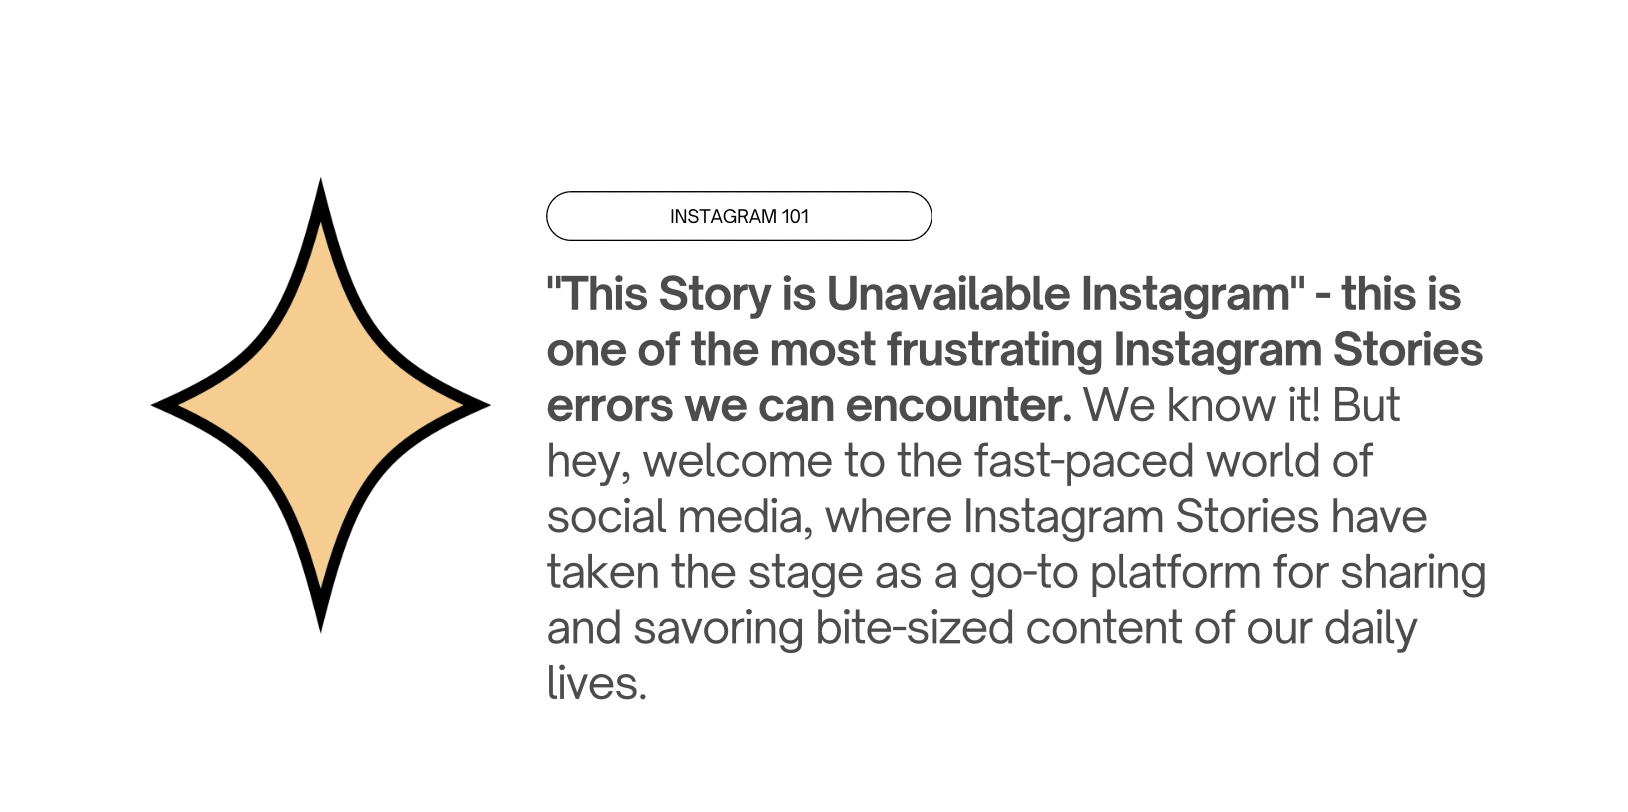 "This Story is Unavailable Instagram" - What Does it Mean?